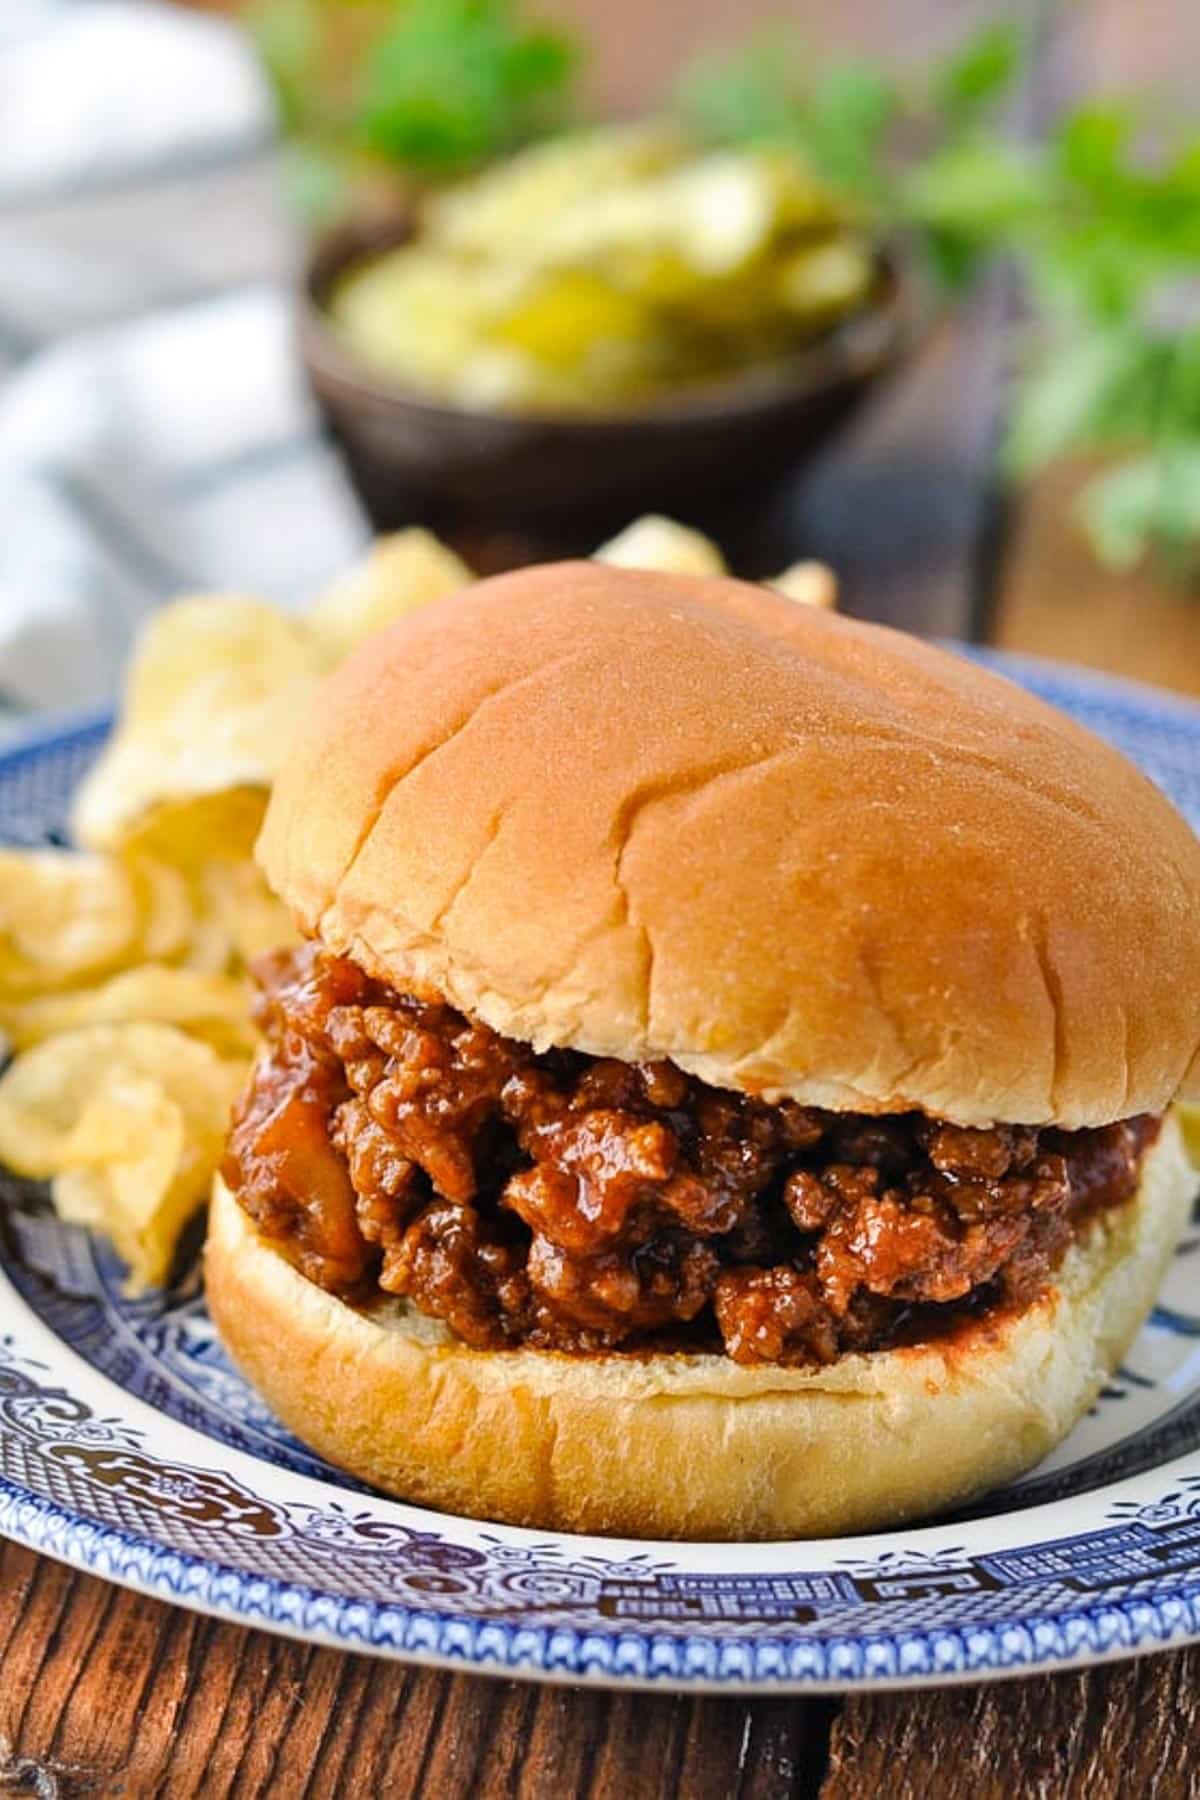 Side shot of homemade sloppy joes on a blue and white plate.